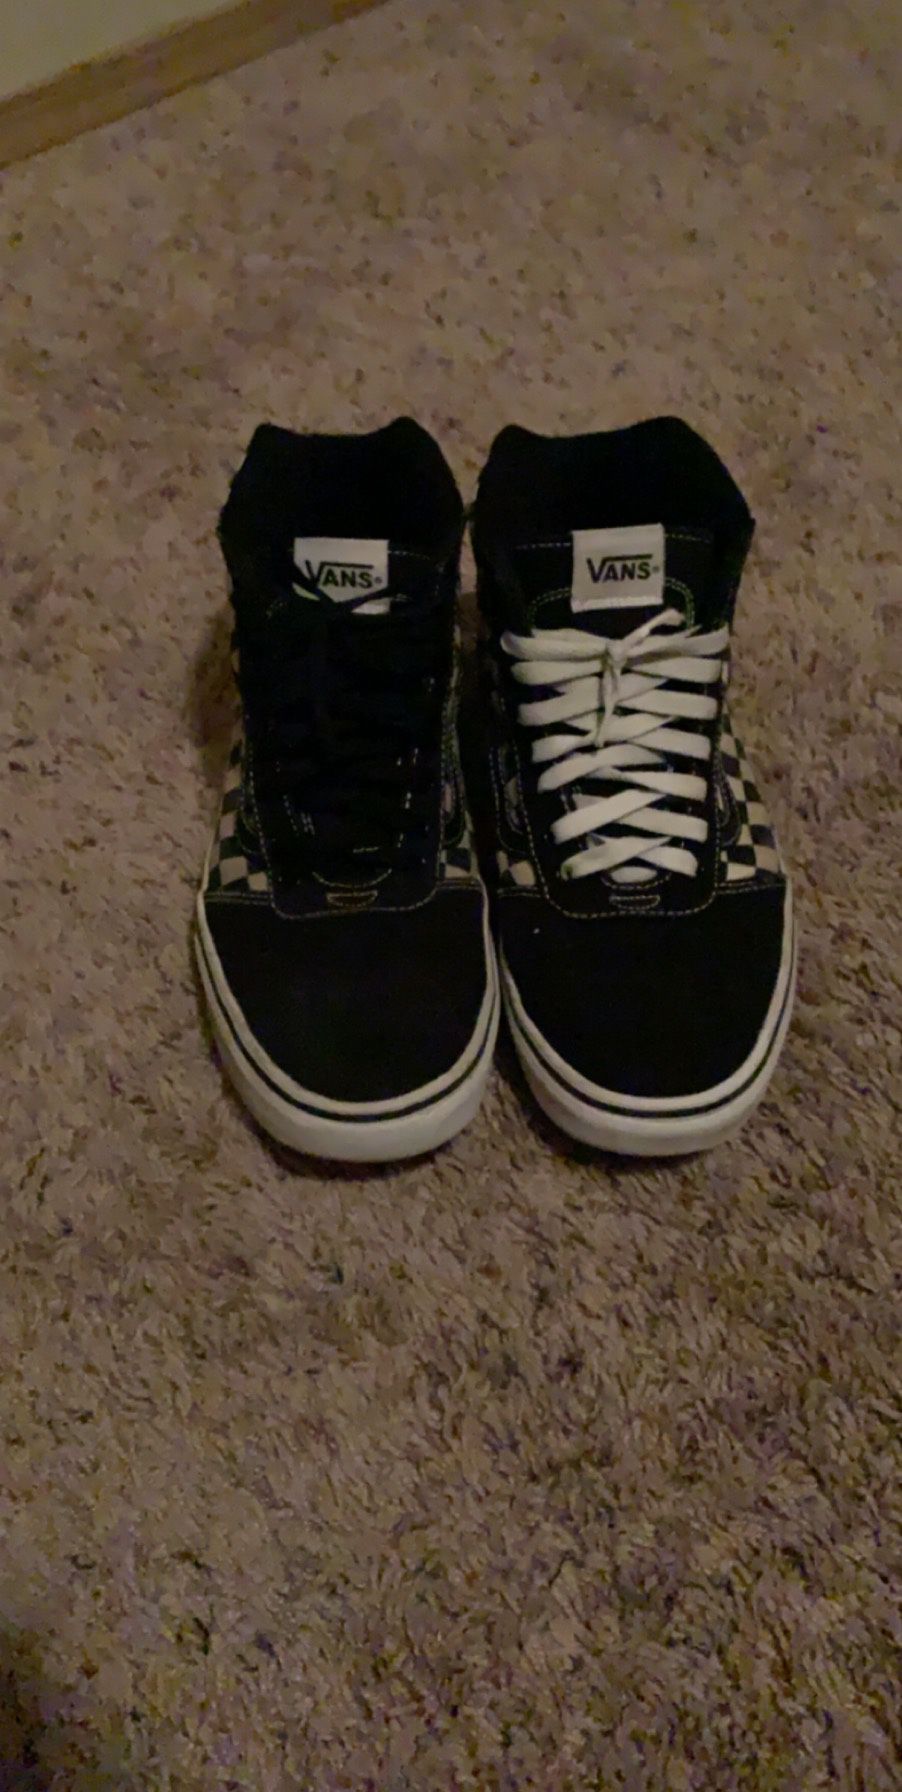 Black and White checkered vans (mitch match shoelaces)